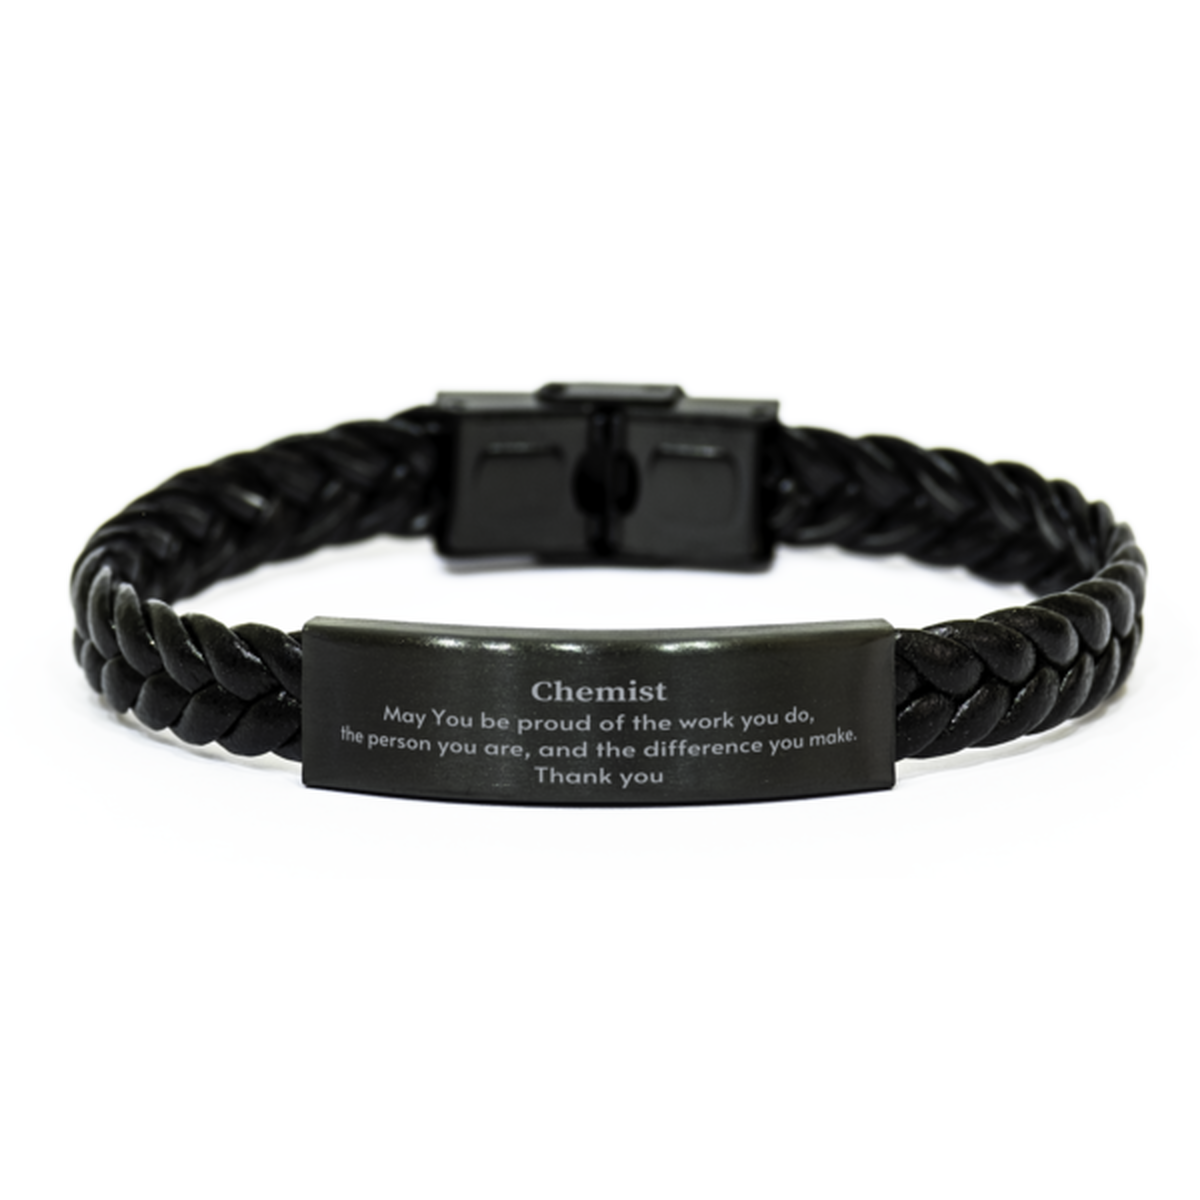 Heartwarming Braided Leather Bracelet Retirement Coworkers Gifts for Chemist, Chemist May You be proud of the work you do, the person you are Gifts for Boss Men Women Friends